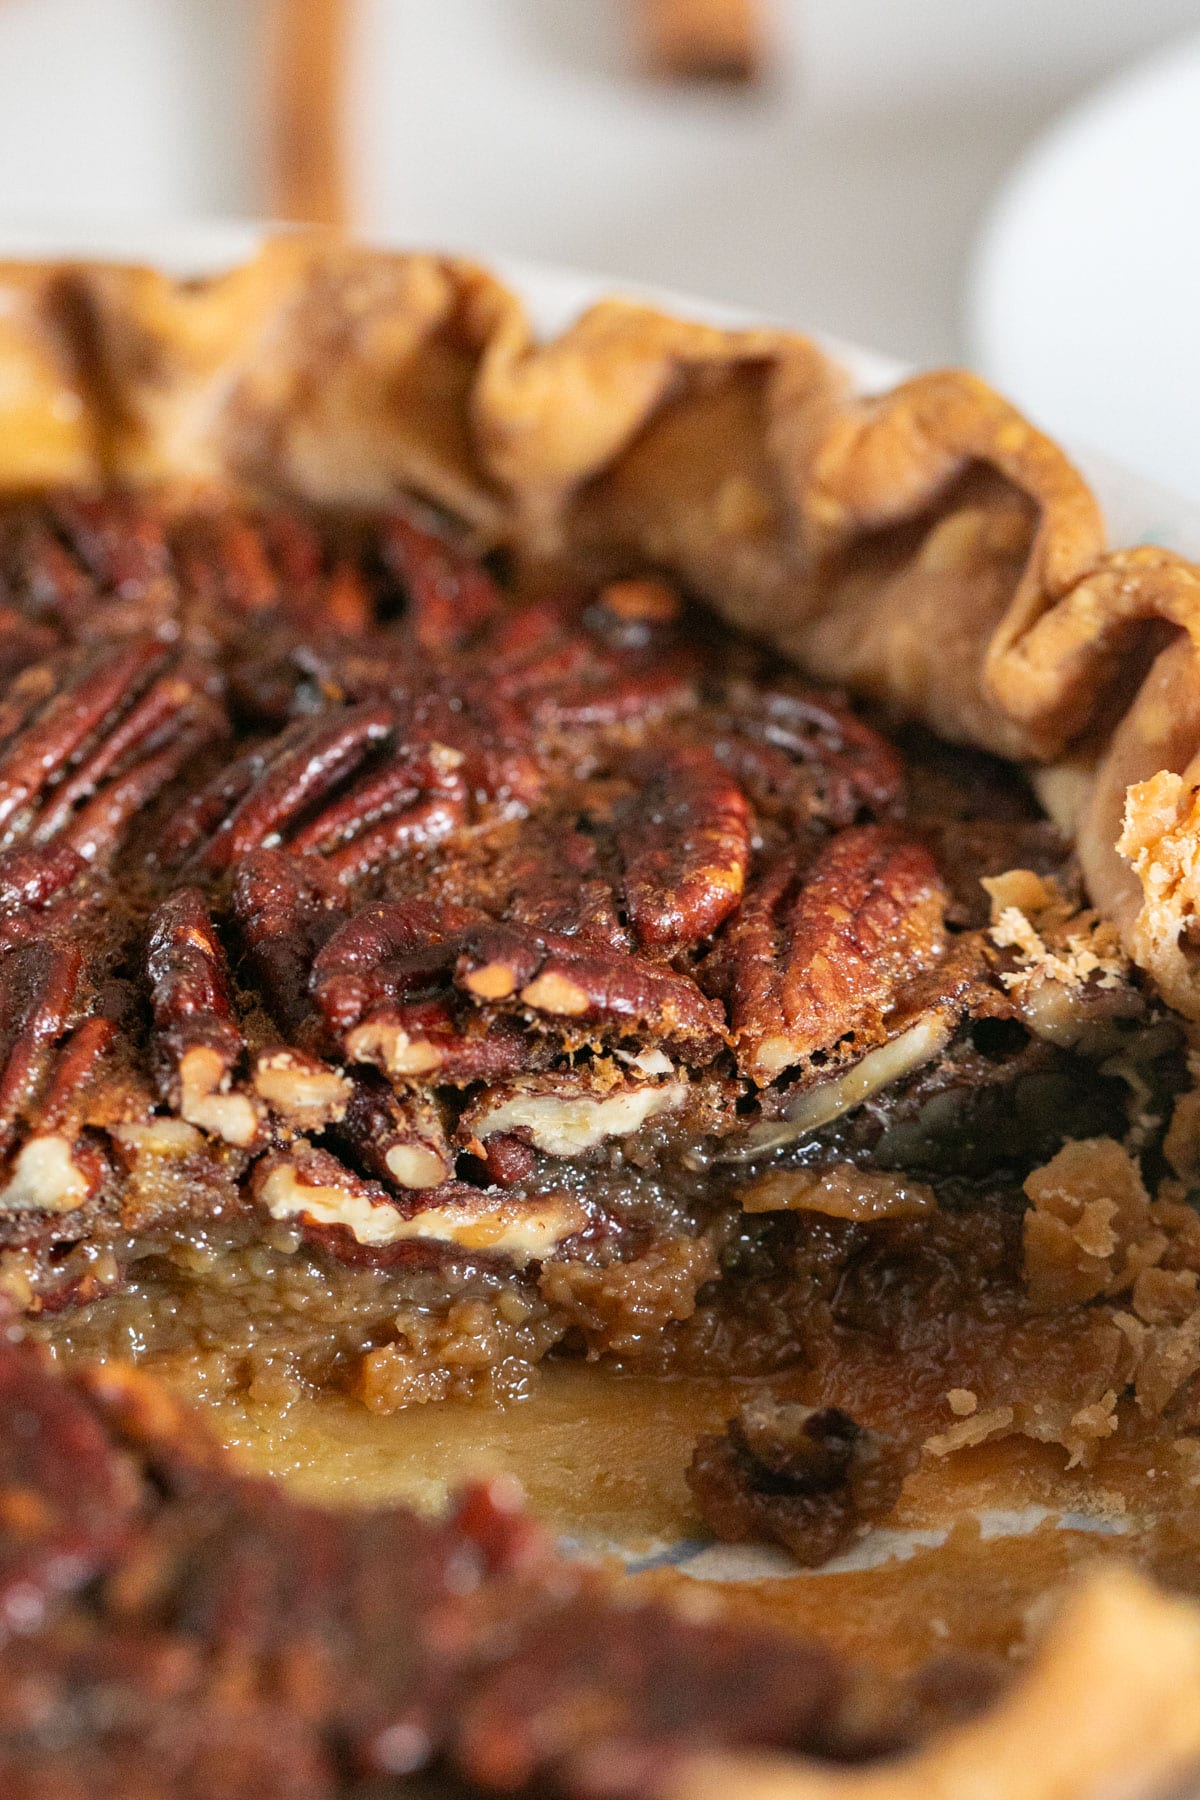 A close up image of the inside of the pie after a slice has been removed.